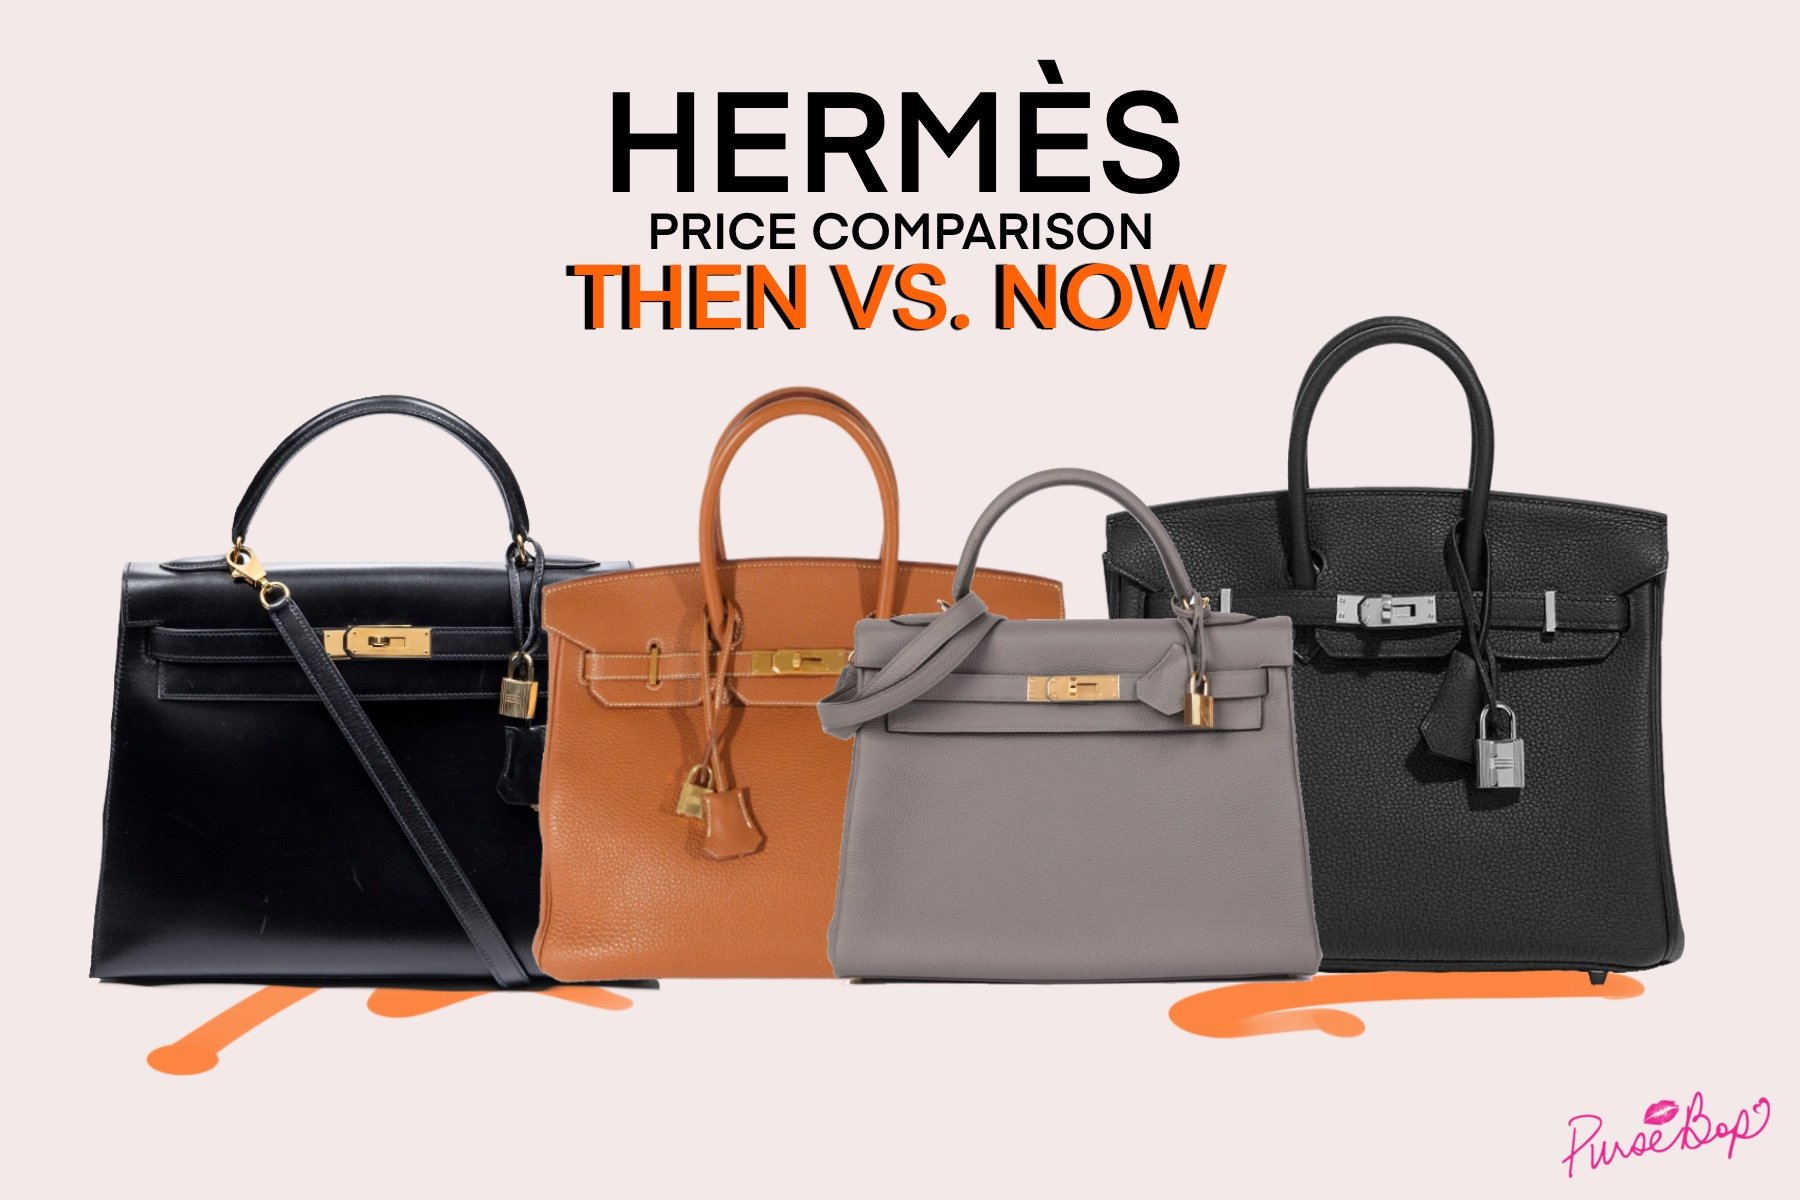 Hermès Birkin Prices In 2023: Here's What All The Models Cost